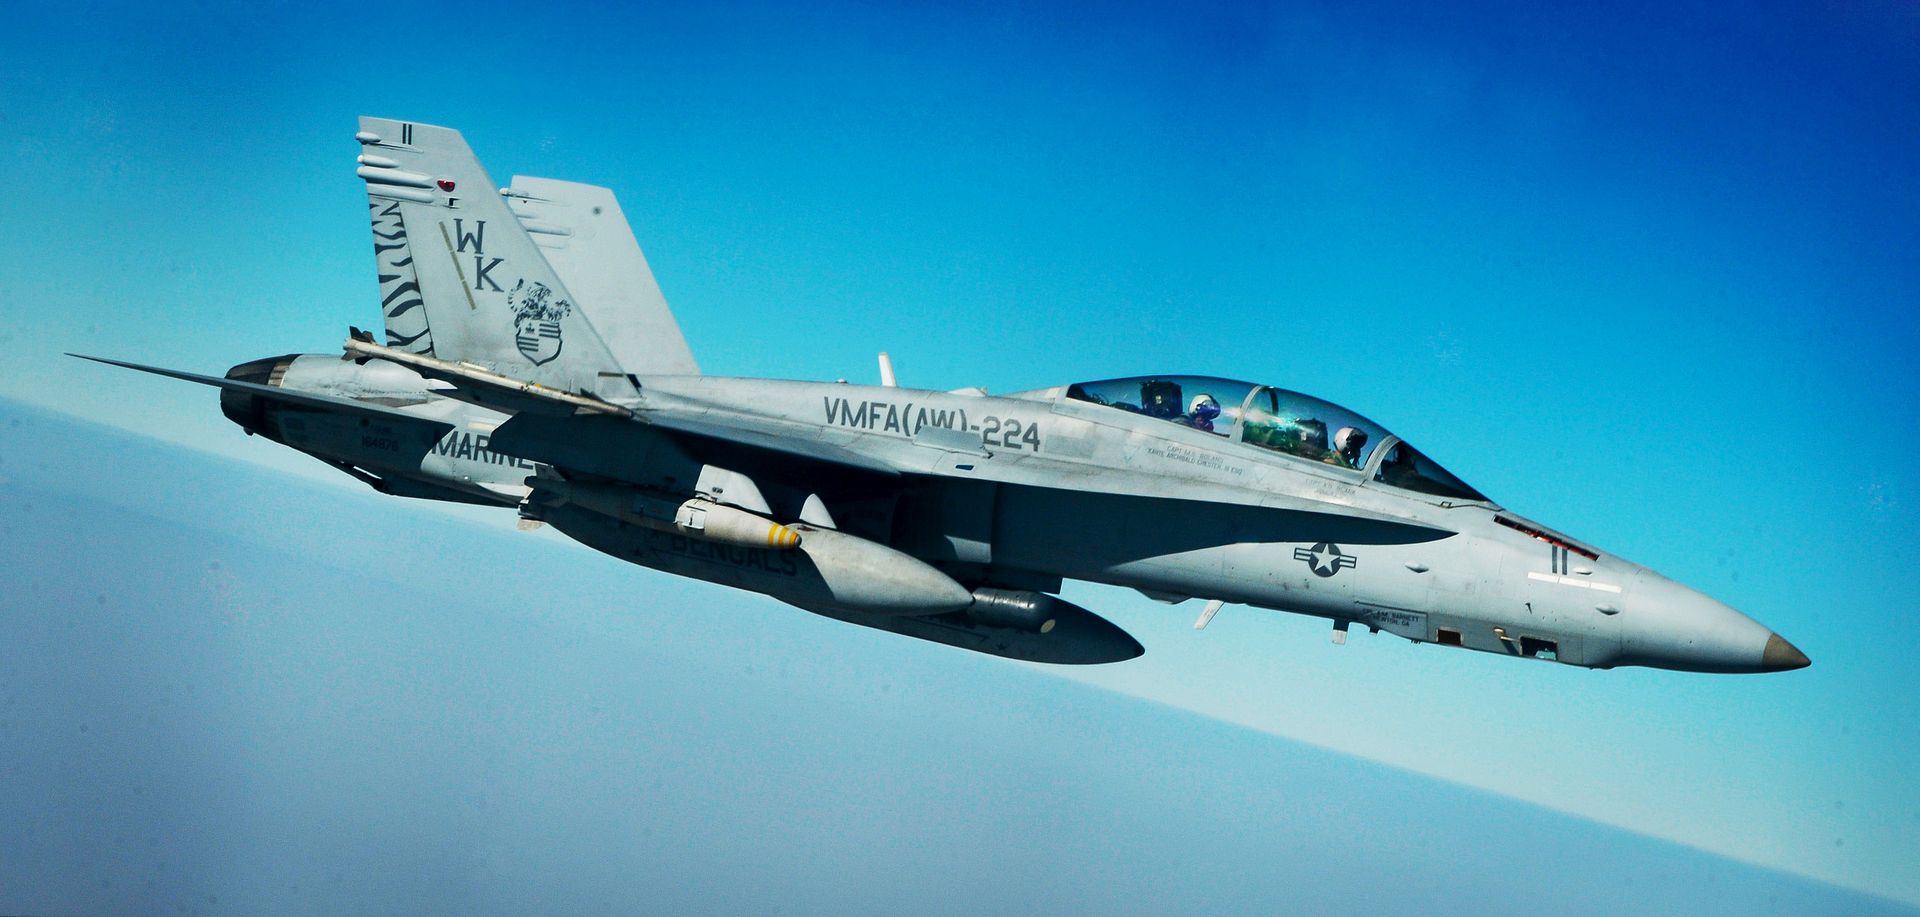 http://i262.photobucket.com/albums/ii120/Duggy009/A%20and%20A%20Three/FA-18%20Hornet%20departs%20after%20receiving%20fuel%20from%20a%20KC-135%20Stratotanker%20assigned%20to%20the%20340th%20Expeditionary%20Air%20Refueling%20Squadron%20during%20a%20mission%20in%20support%20of%20Operation%20Inherent%20Resolv_1.jpg